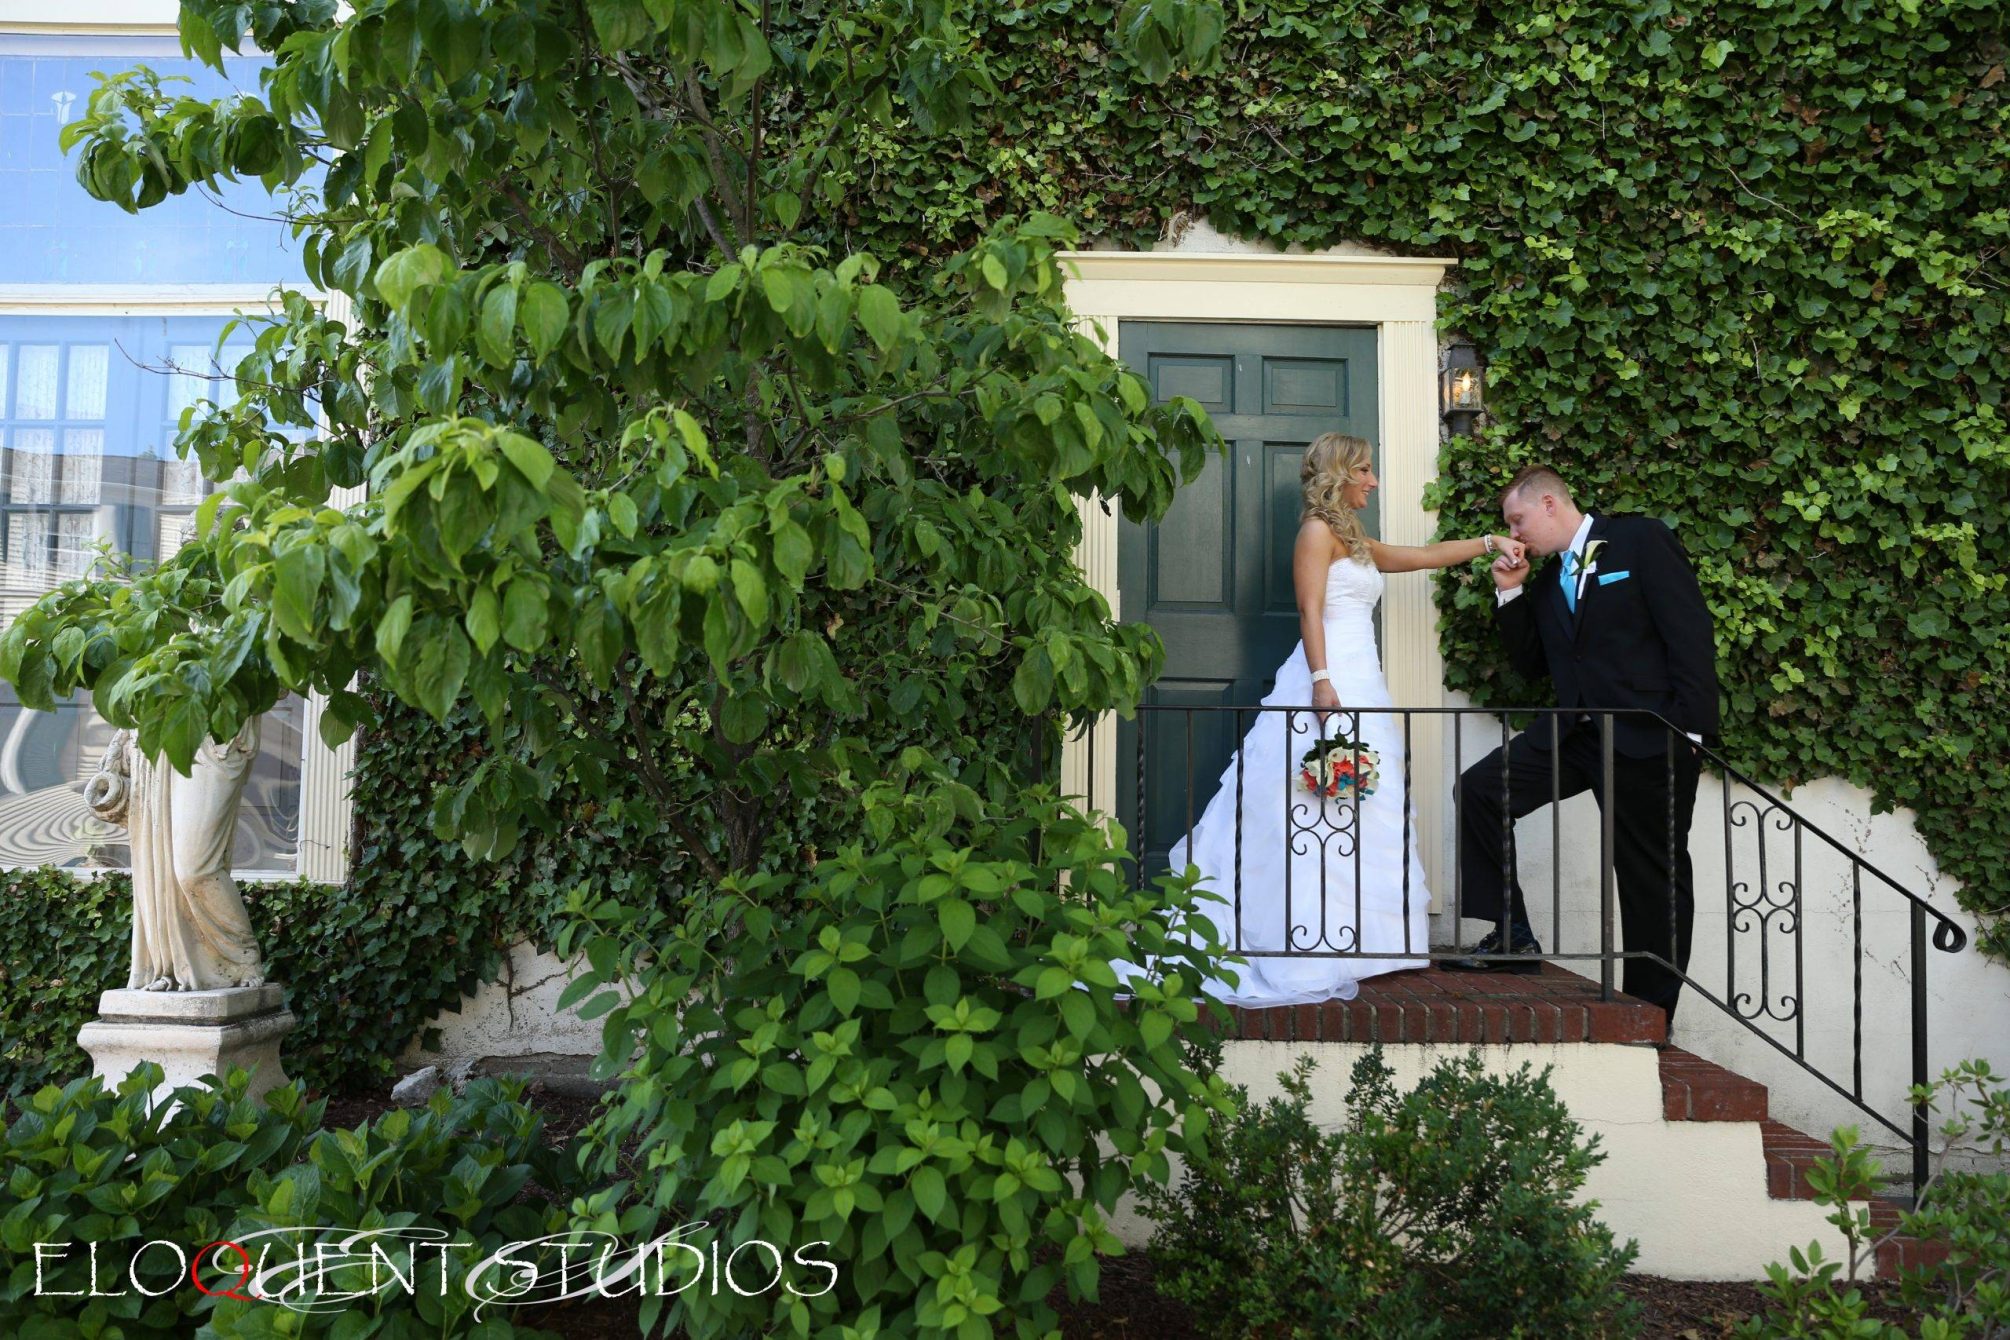 David’s Country Inn kissing the bride's hand at the door